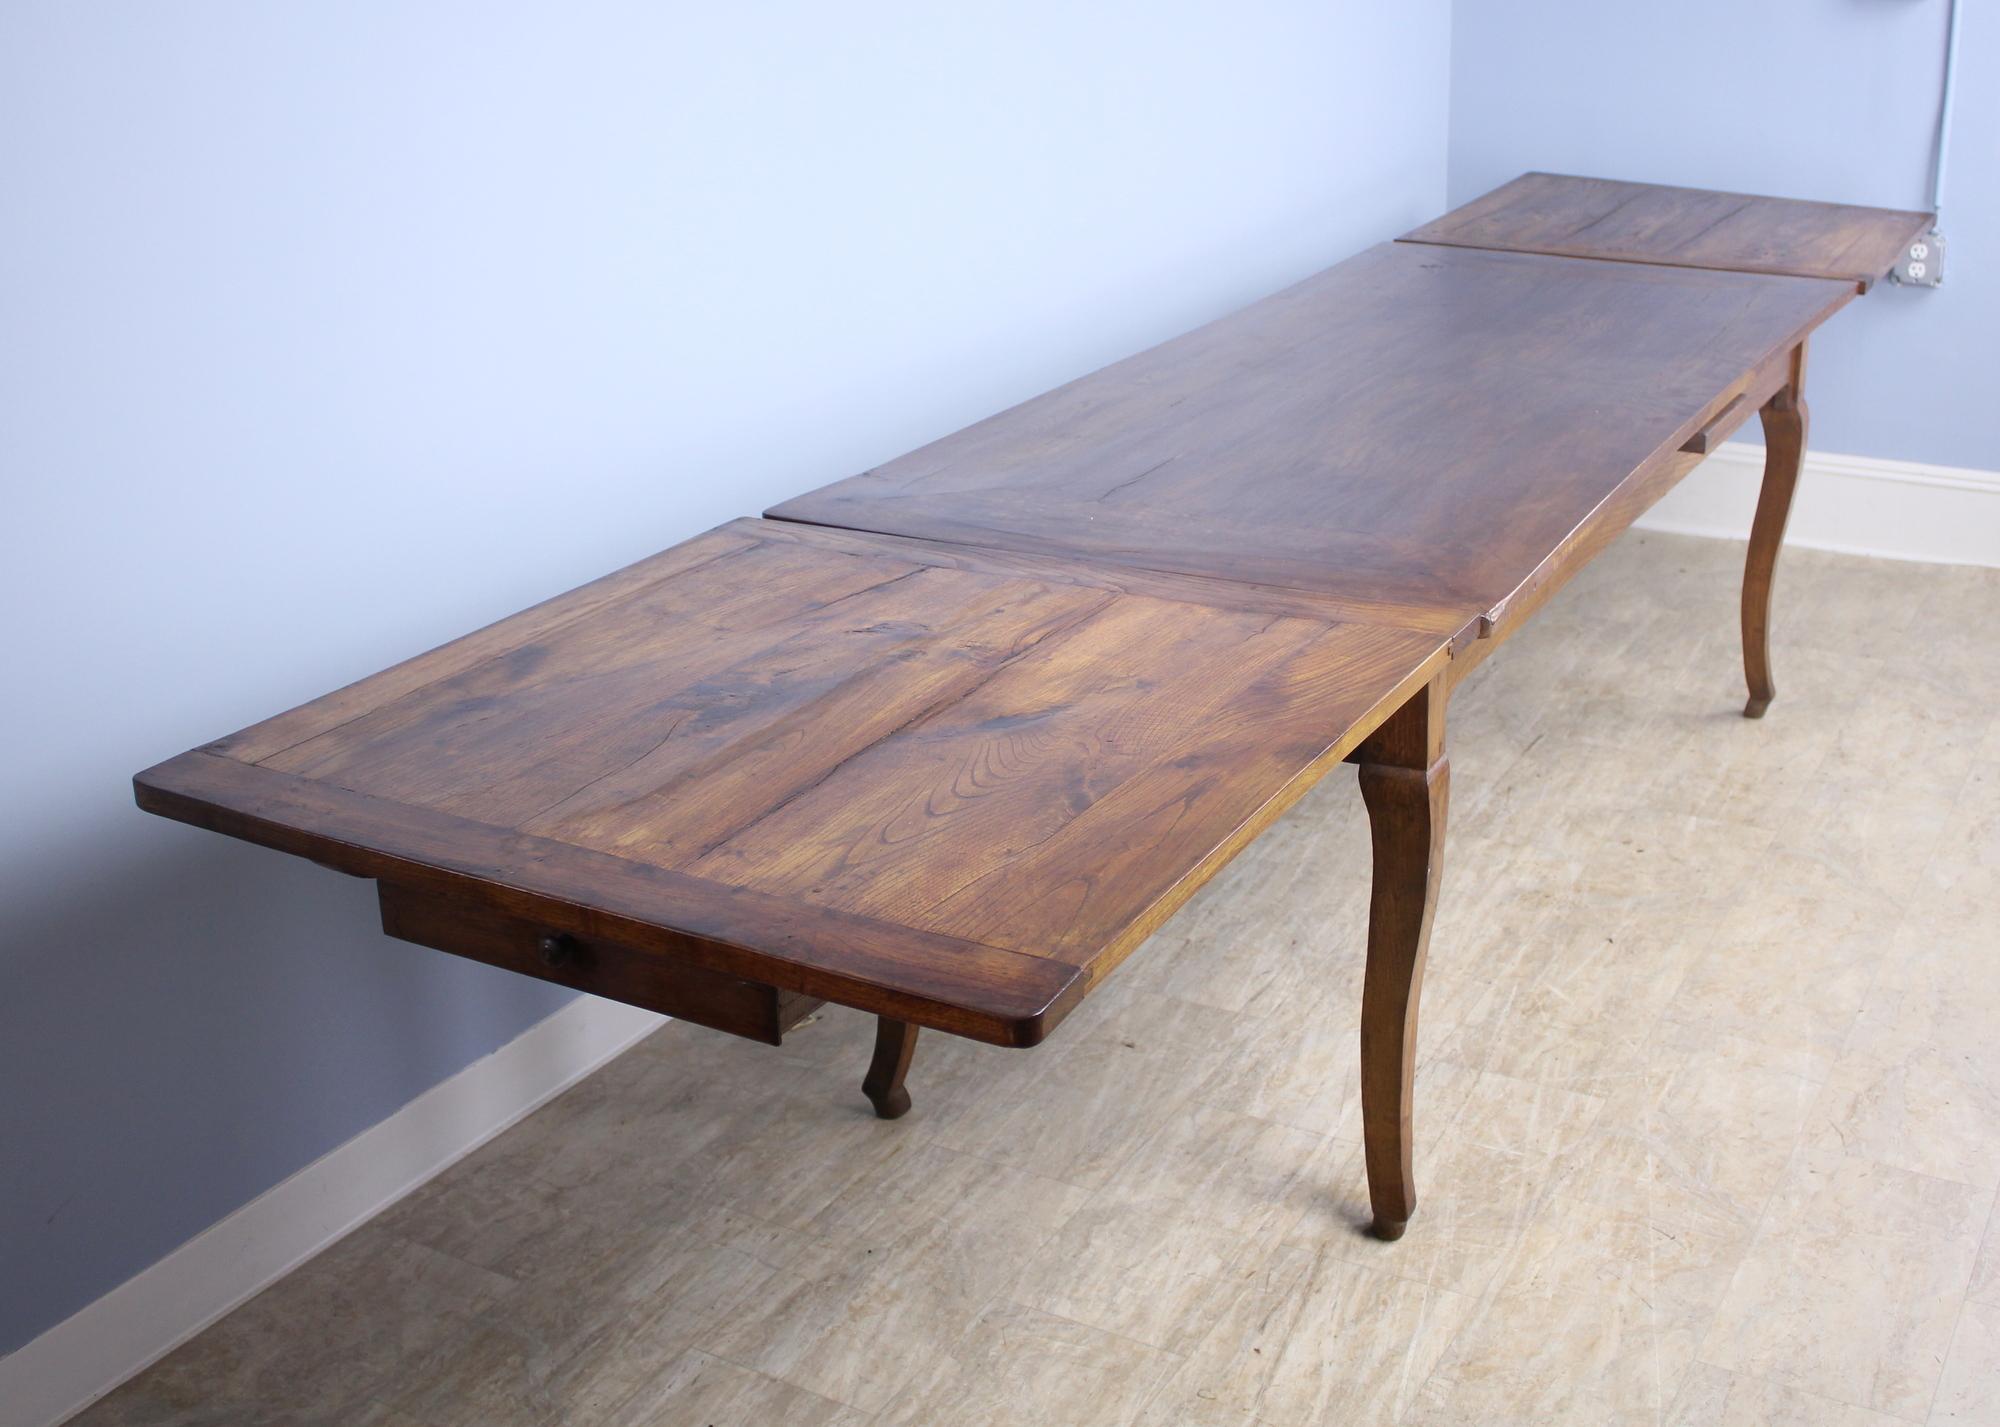 French Antique Oak Dining Table with Hoof Feet